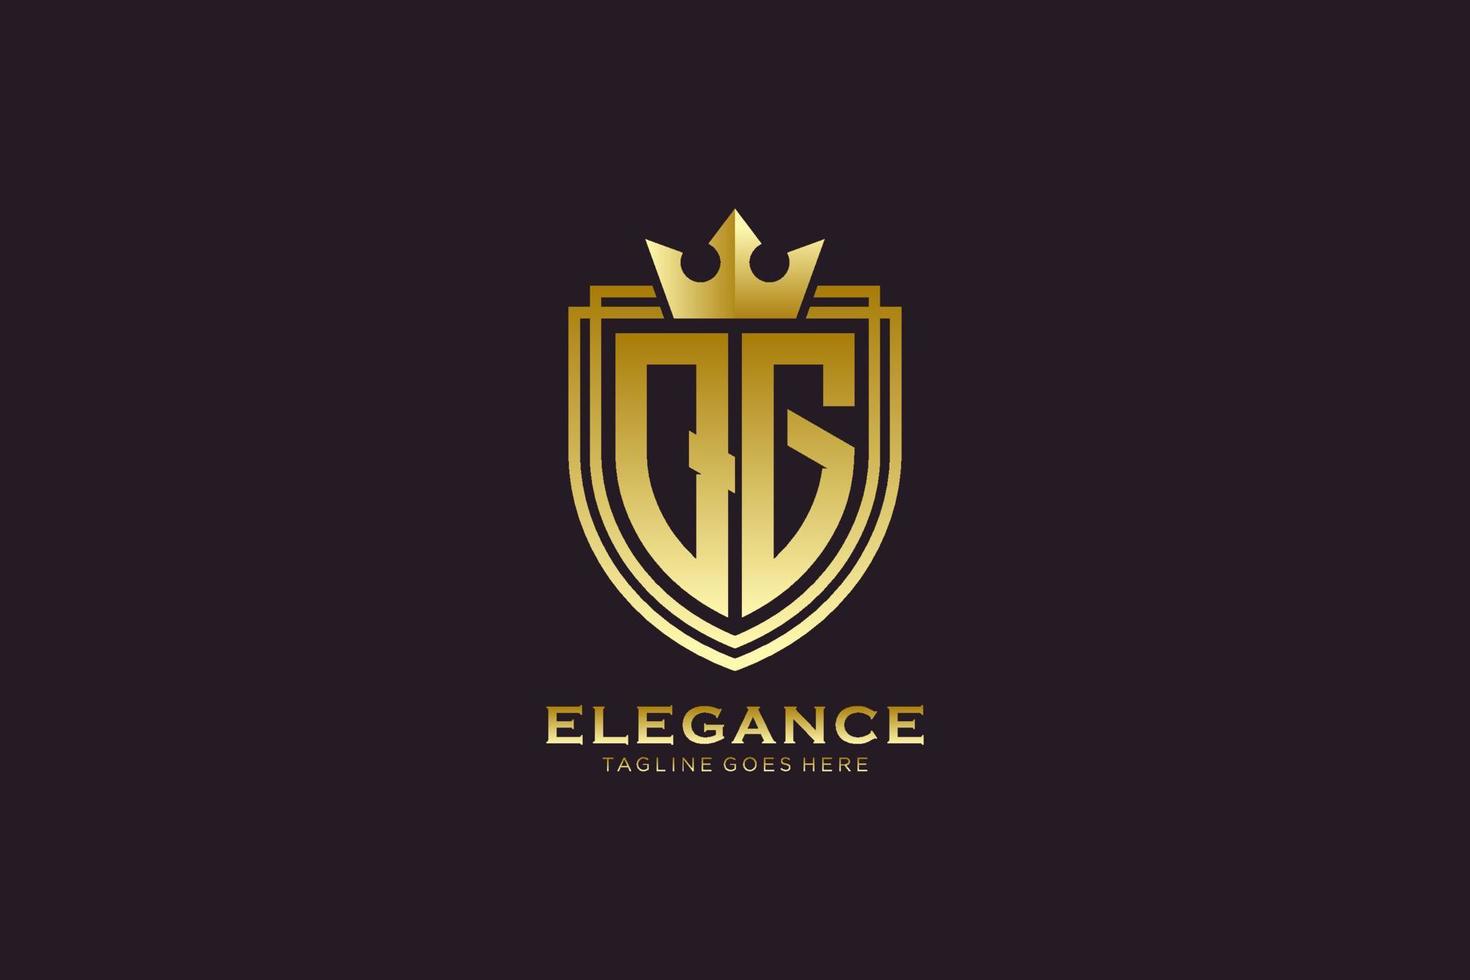 initial QG elegant luxury monogram logo or badge template with scrolls and royal crown - perfect for luxurious branding projects vector